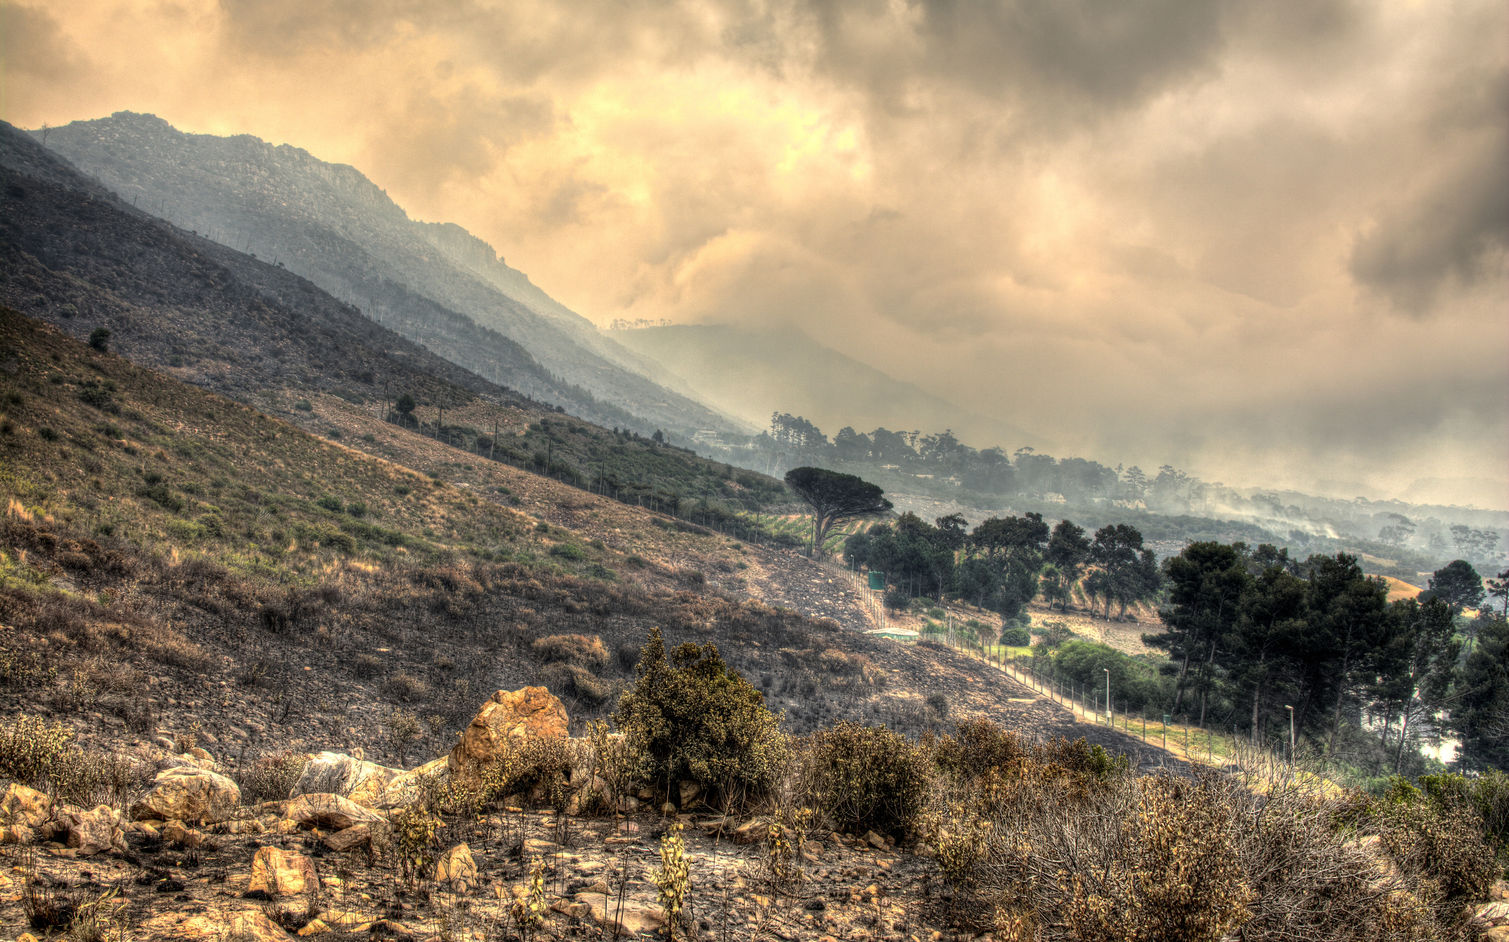 Cape-Town-Fire-March-2015-image-by-Greg-Hillyard-Photography-on-Orms-Connect-Photography-Blog